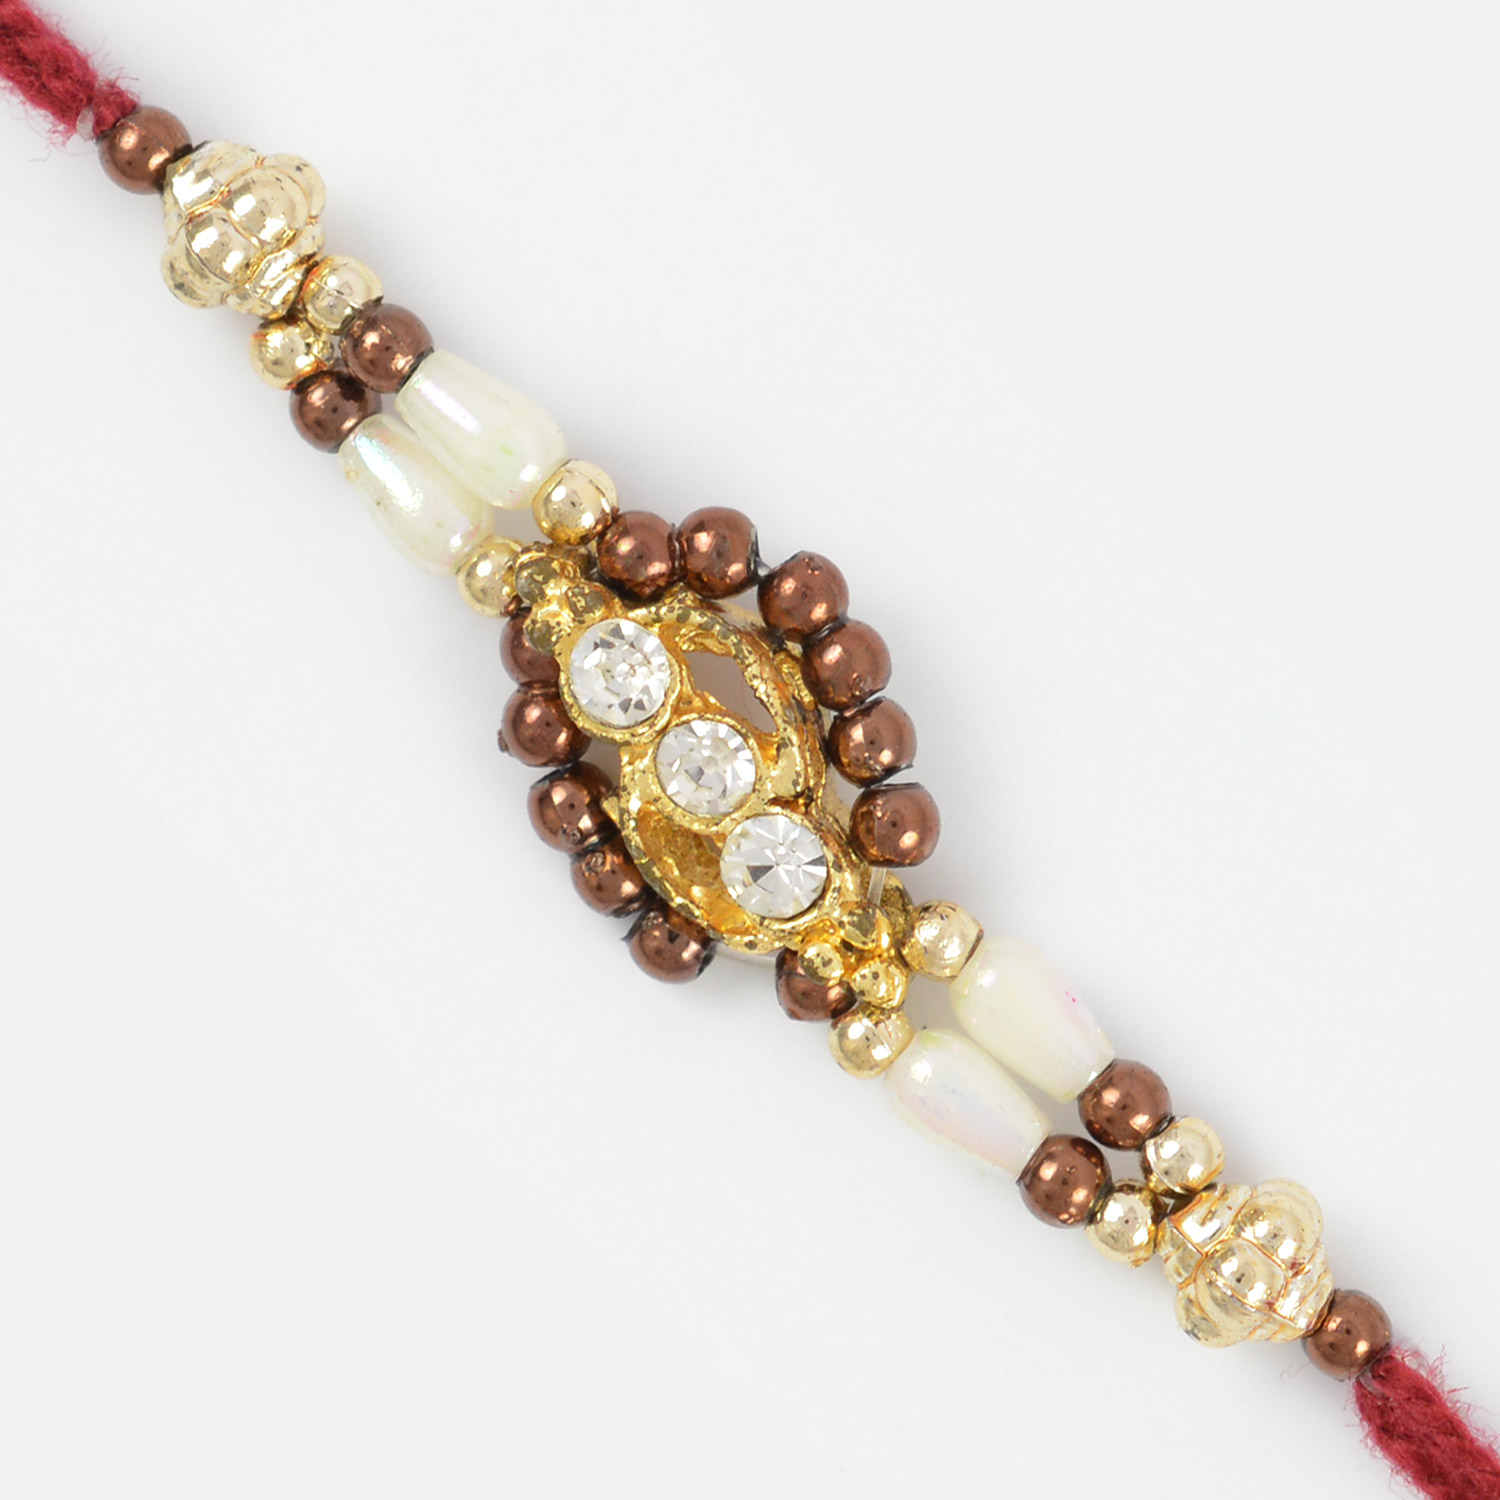 Pleasant Fancy Designer Rakhi with Pearls and Colorful Beads